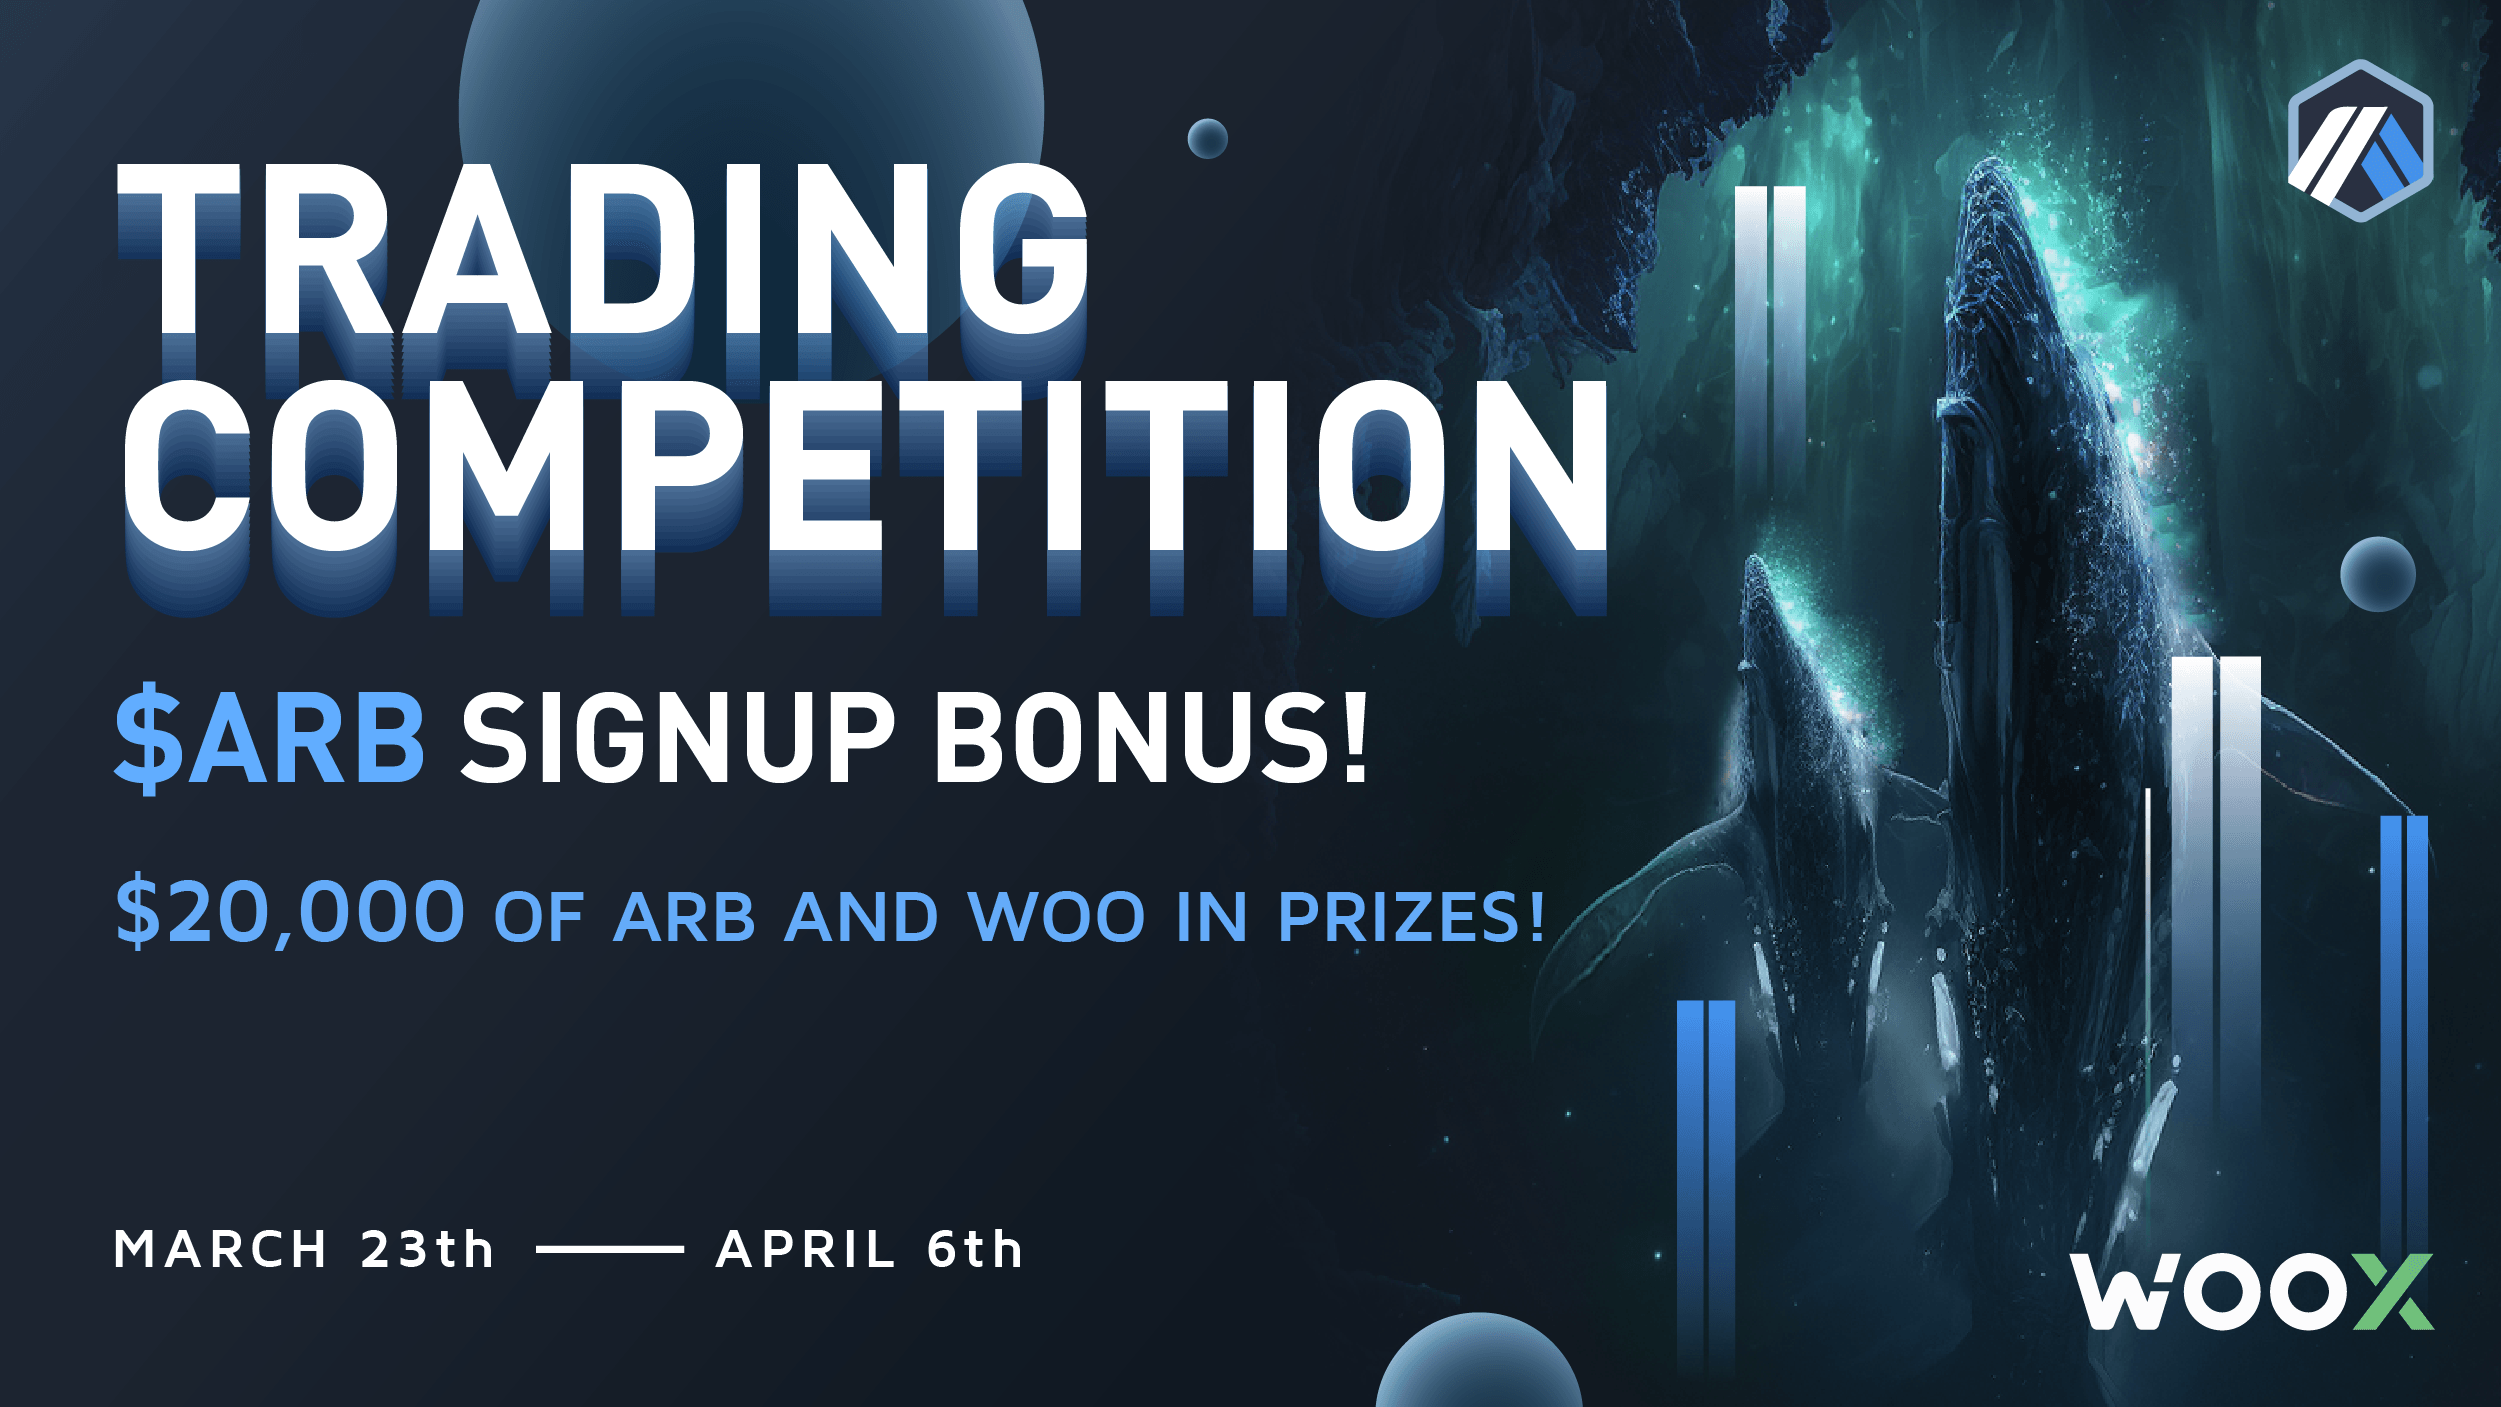 $ARB Trading Competition and signup bonus: Sign up and trade on WOO X to share a prize pool of $20,000 in $ARB and $WOO!